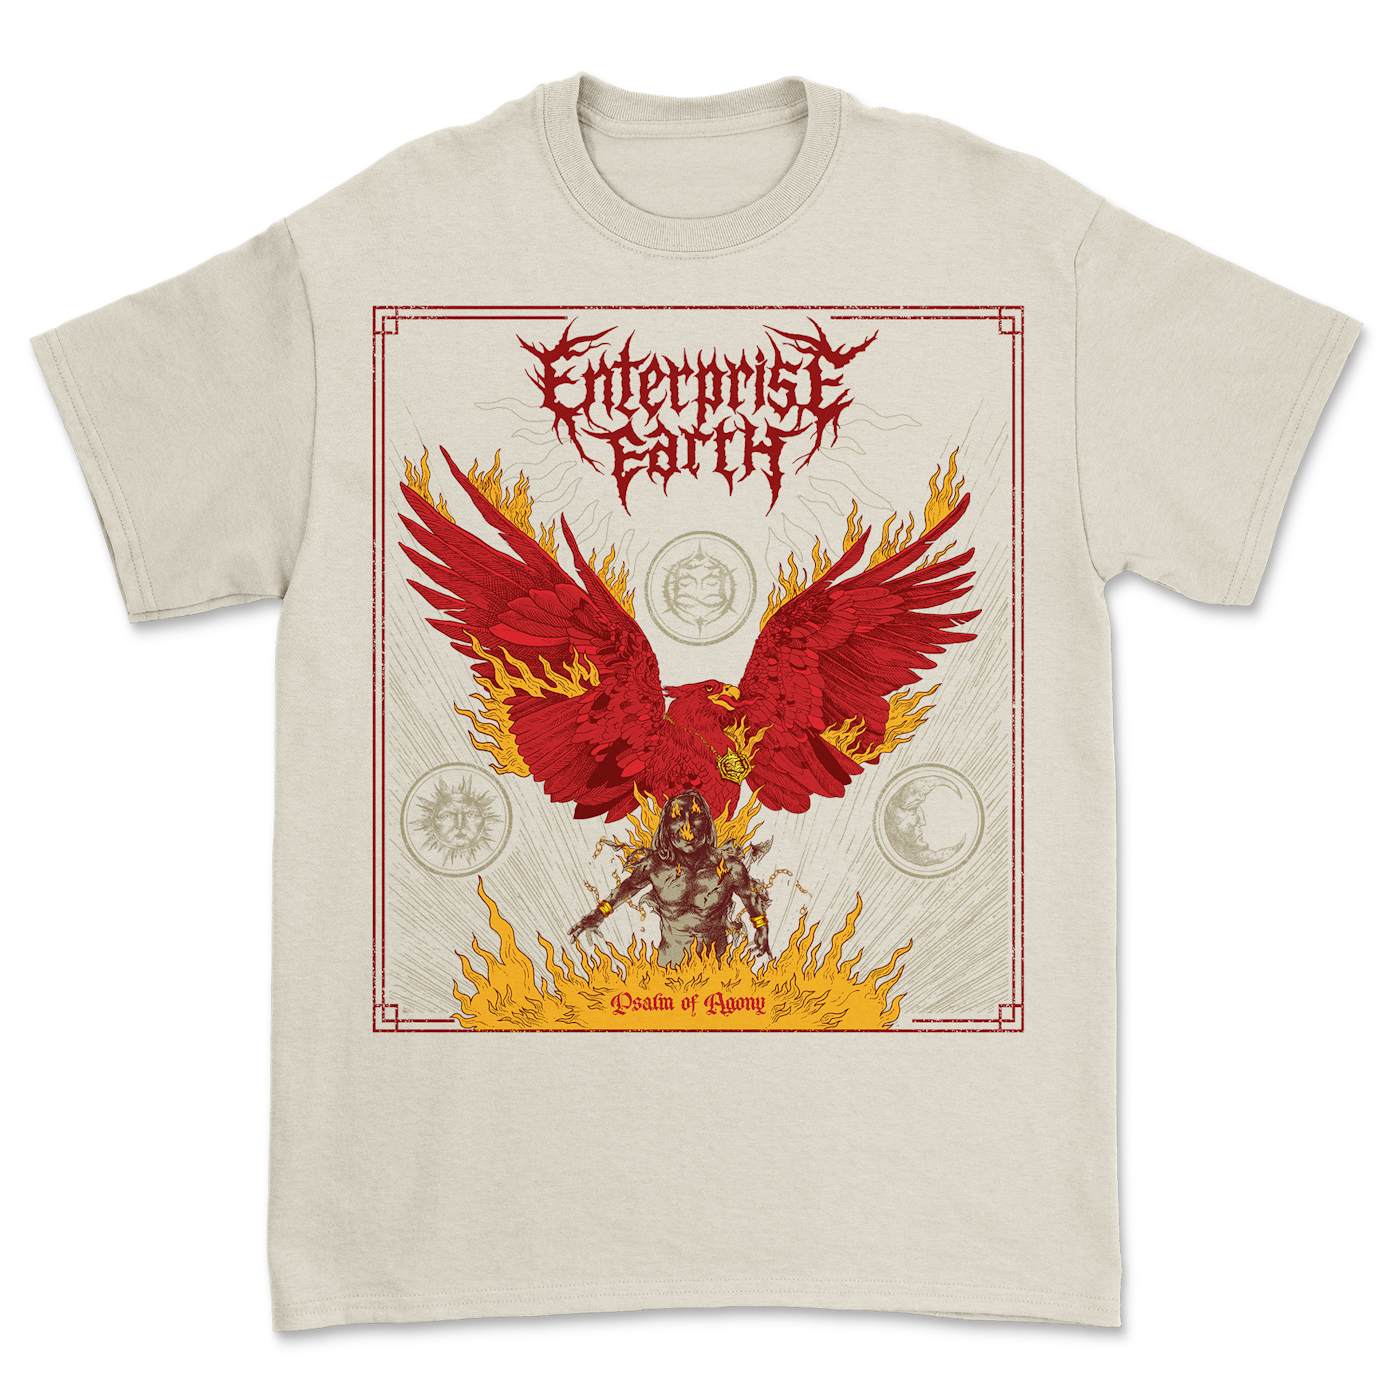 Enterprise Earth Psalm of Agony T-Shirt (Natural)